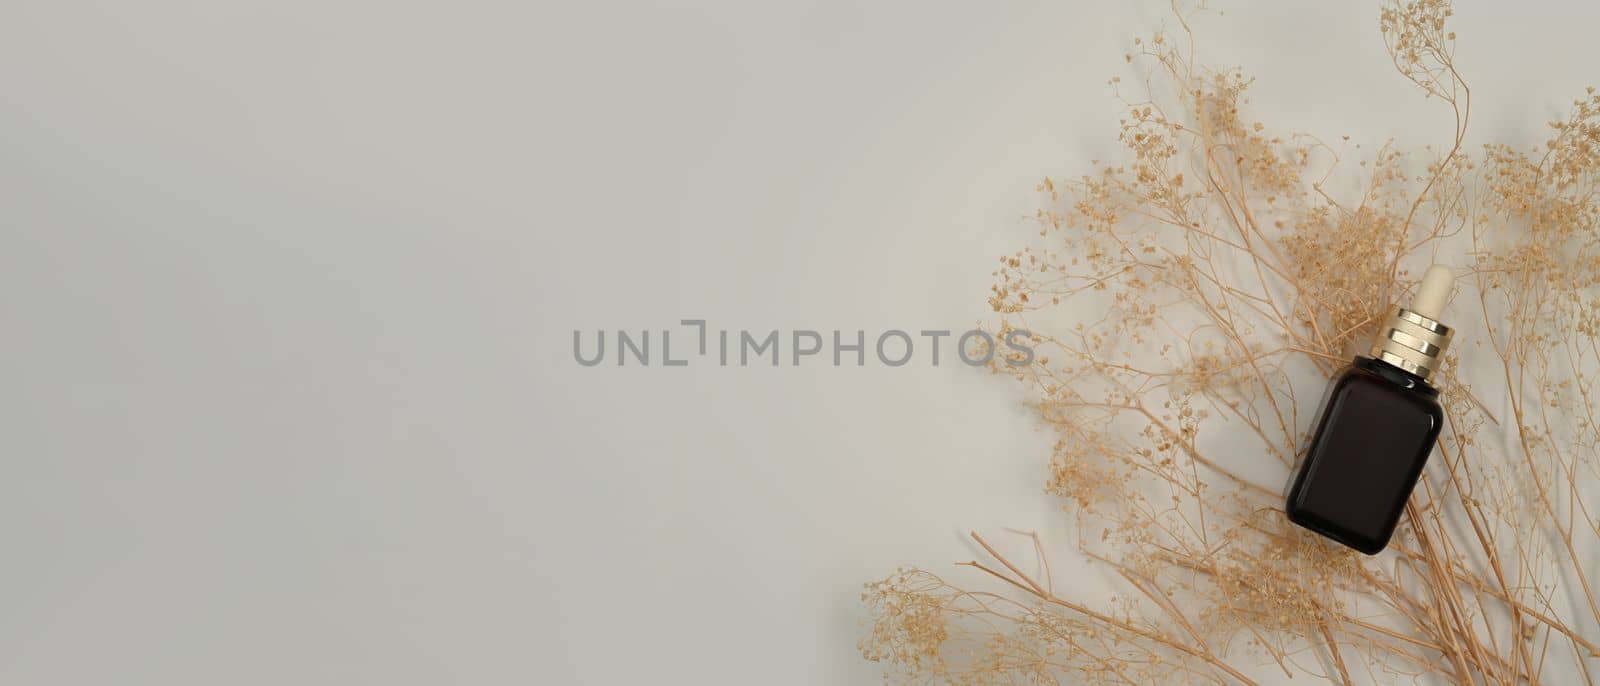 Realistic dropper bottle with dried flowers on white background with copy space for your advertise text.